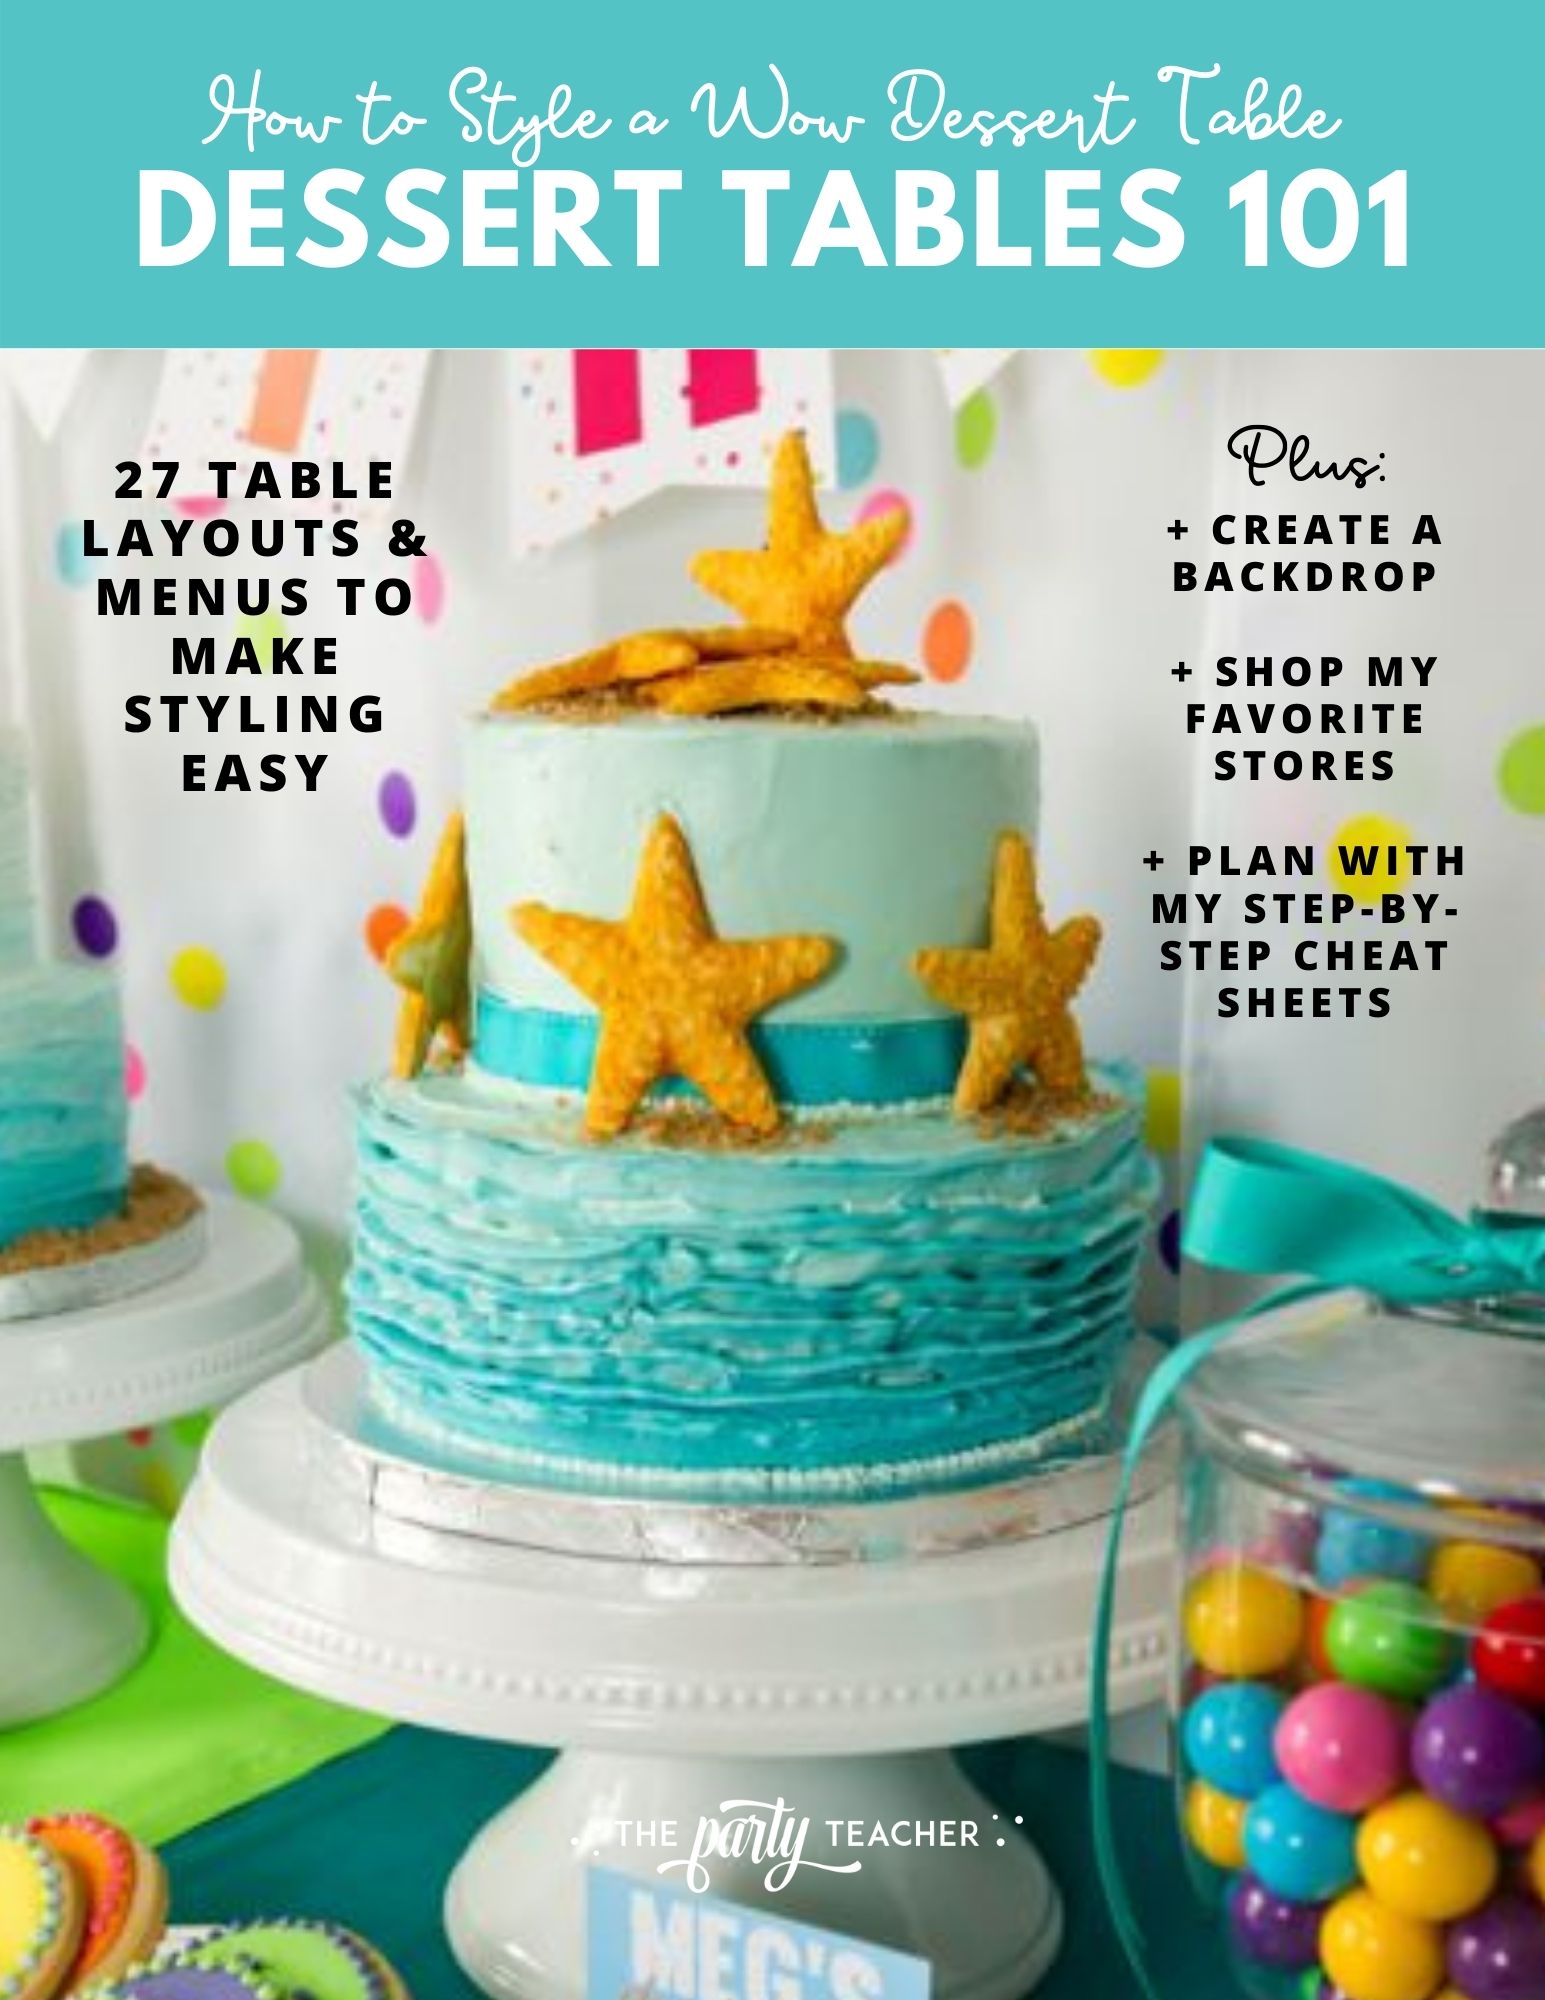 Dessert Tables 101 by The Party Teacher - 1